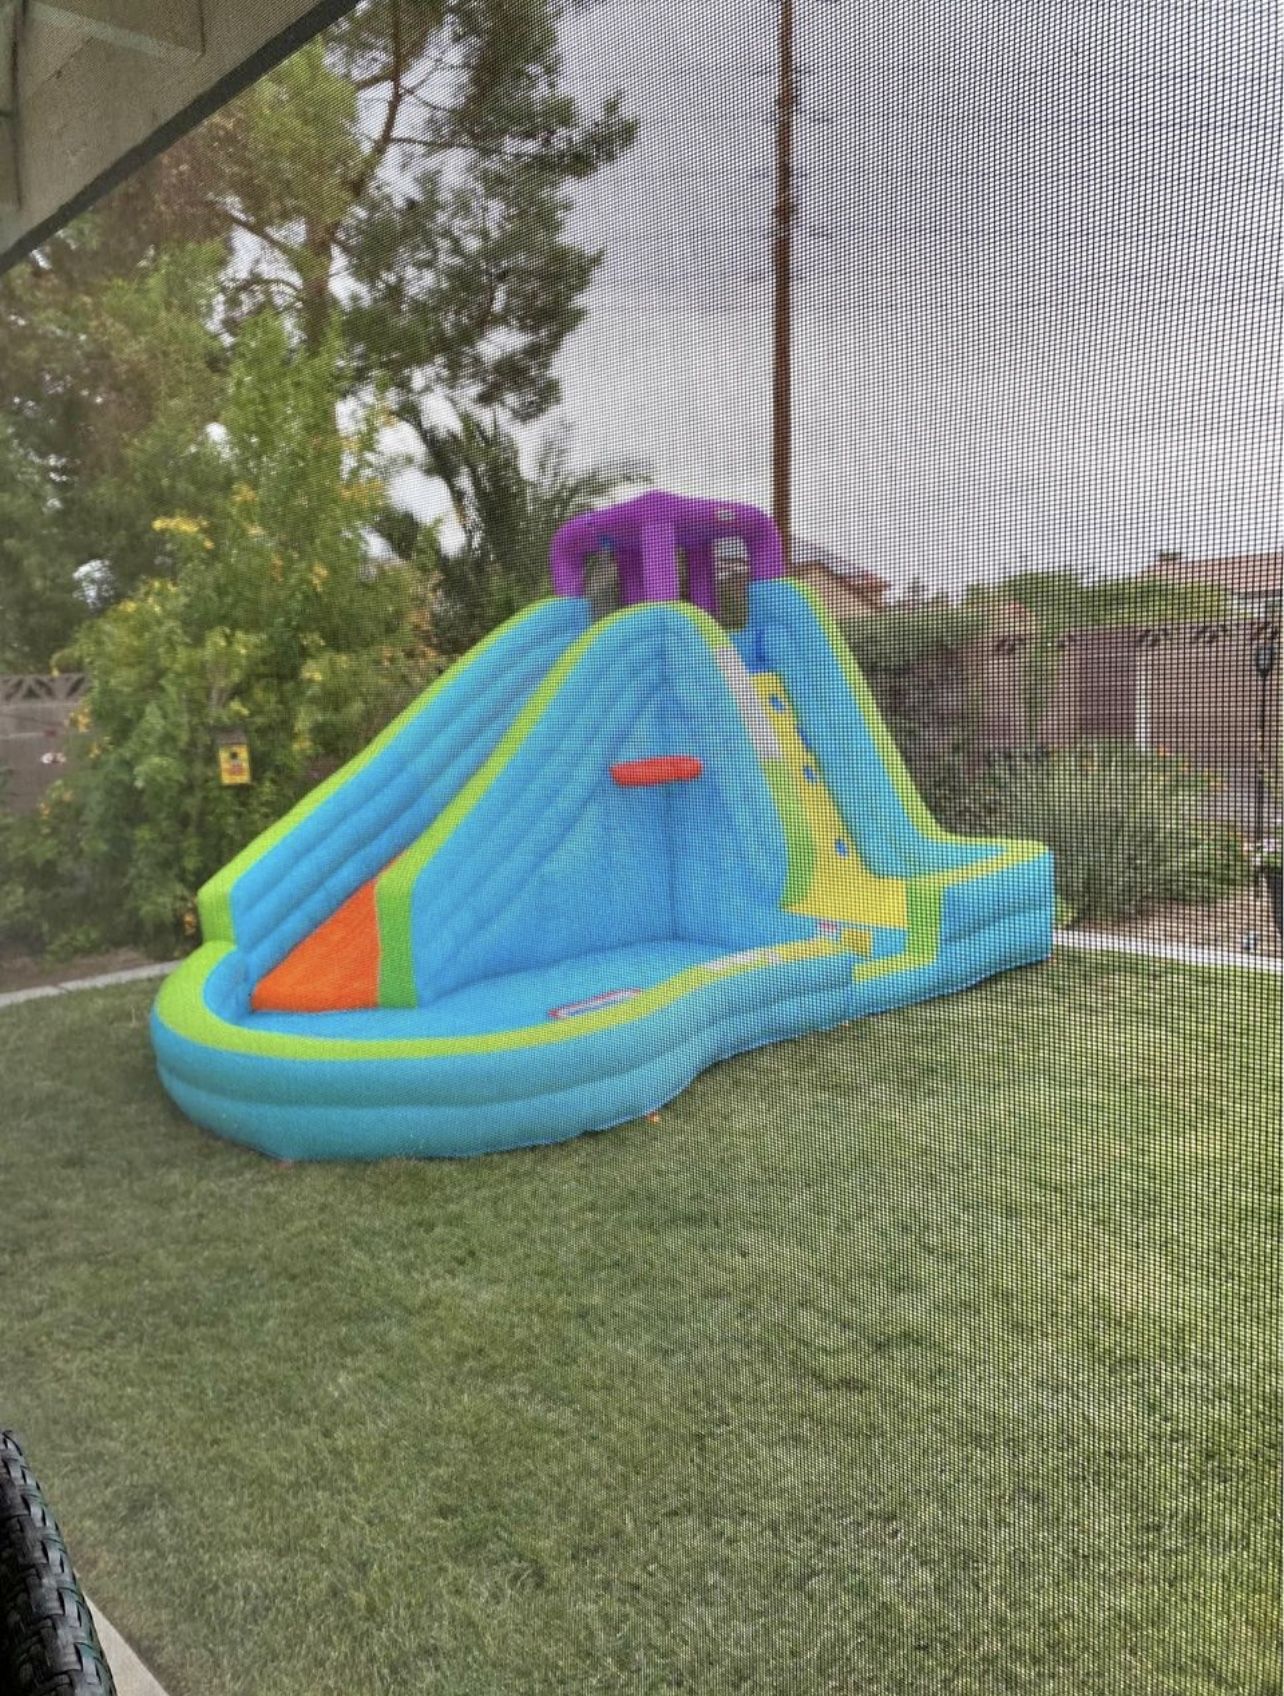   *For SALE*  Inflatable Kids Water Slide